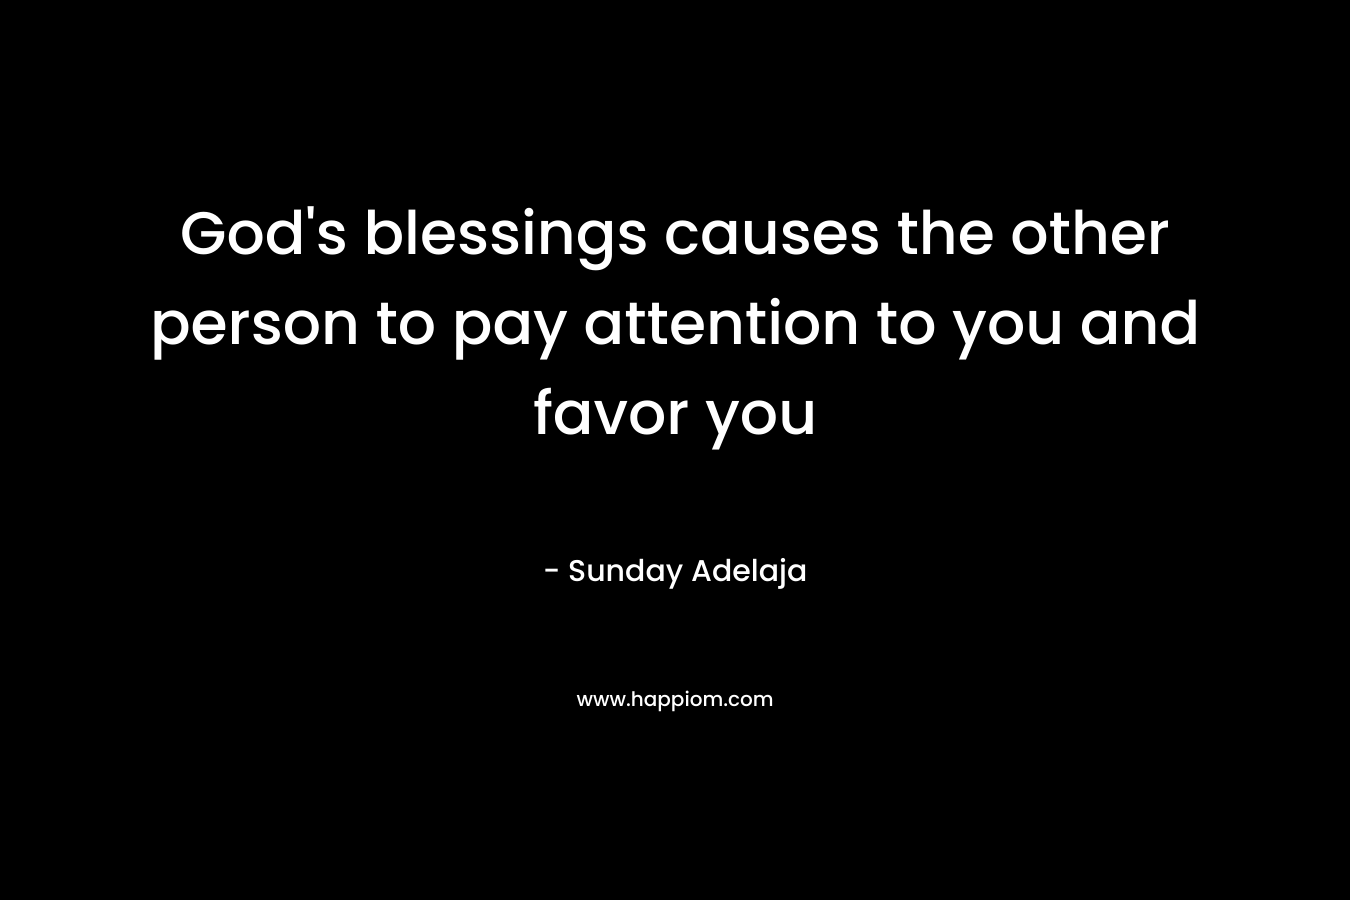 God’s blessings causes the other person to pay attention to you and favor you – Sunday Adelaja